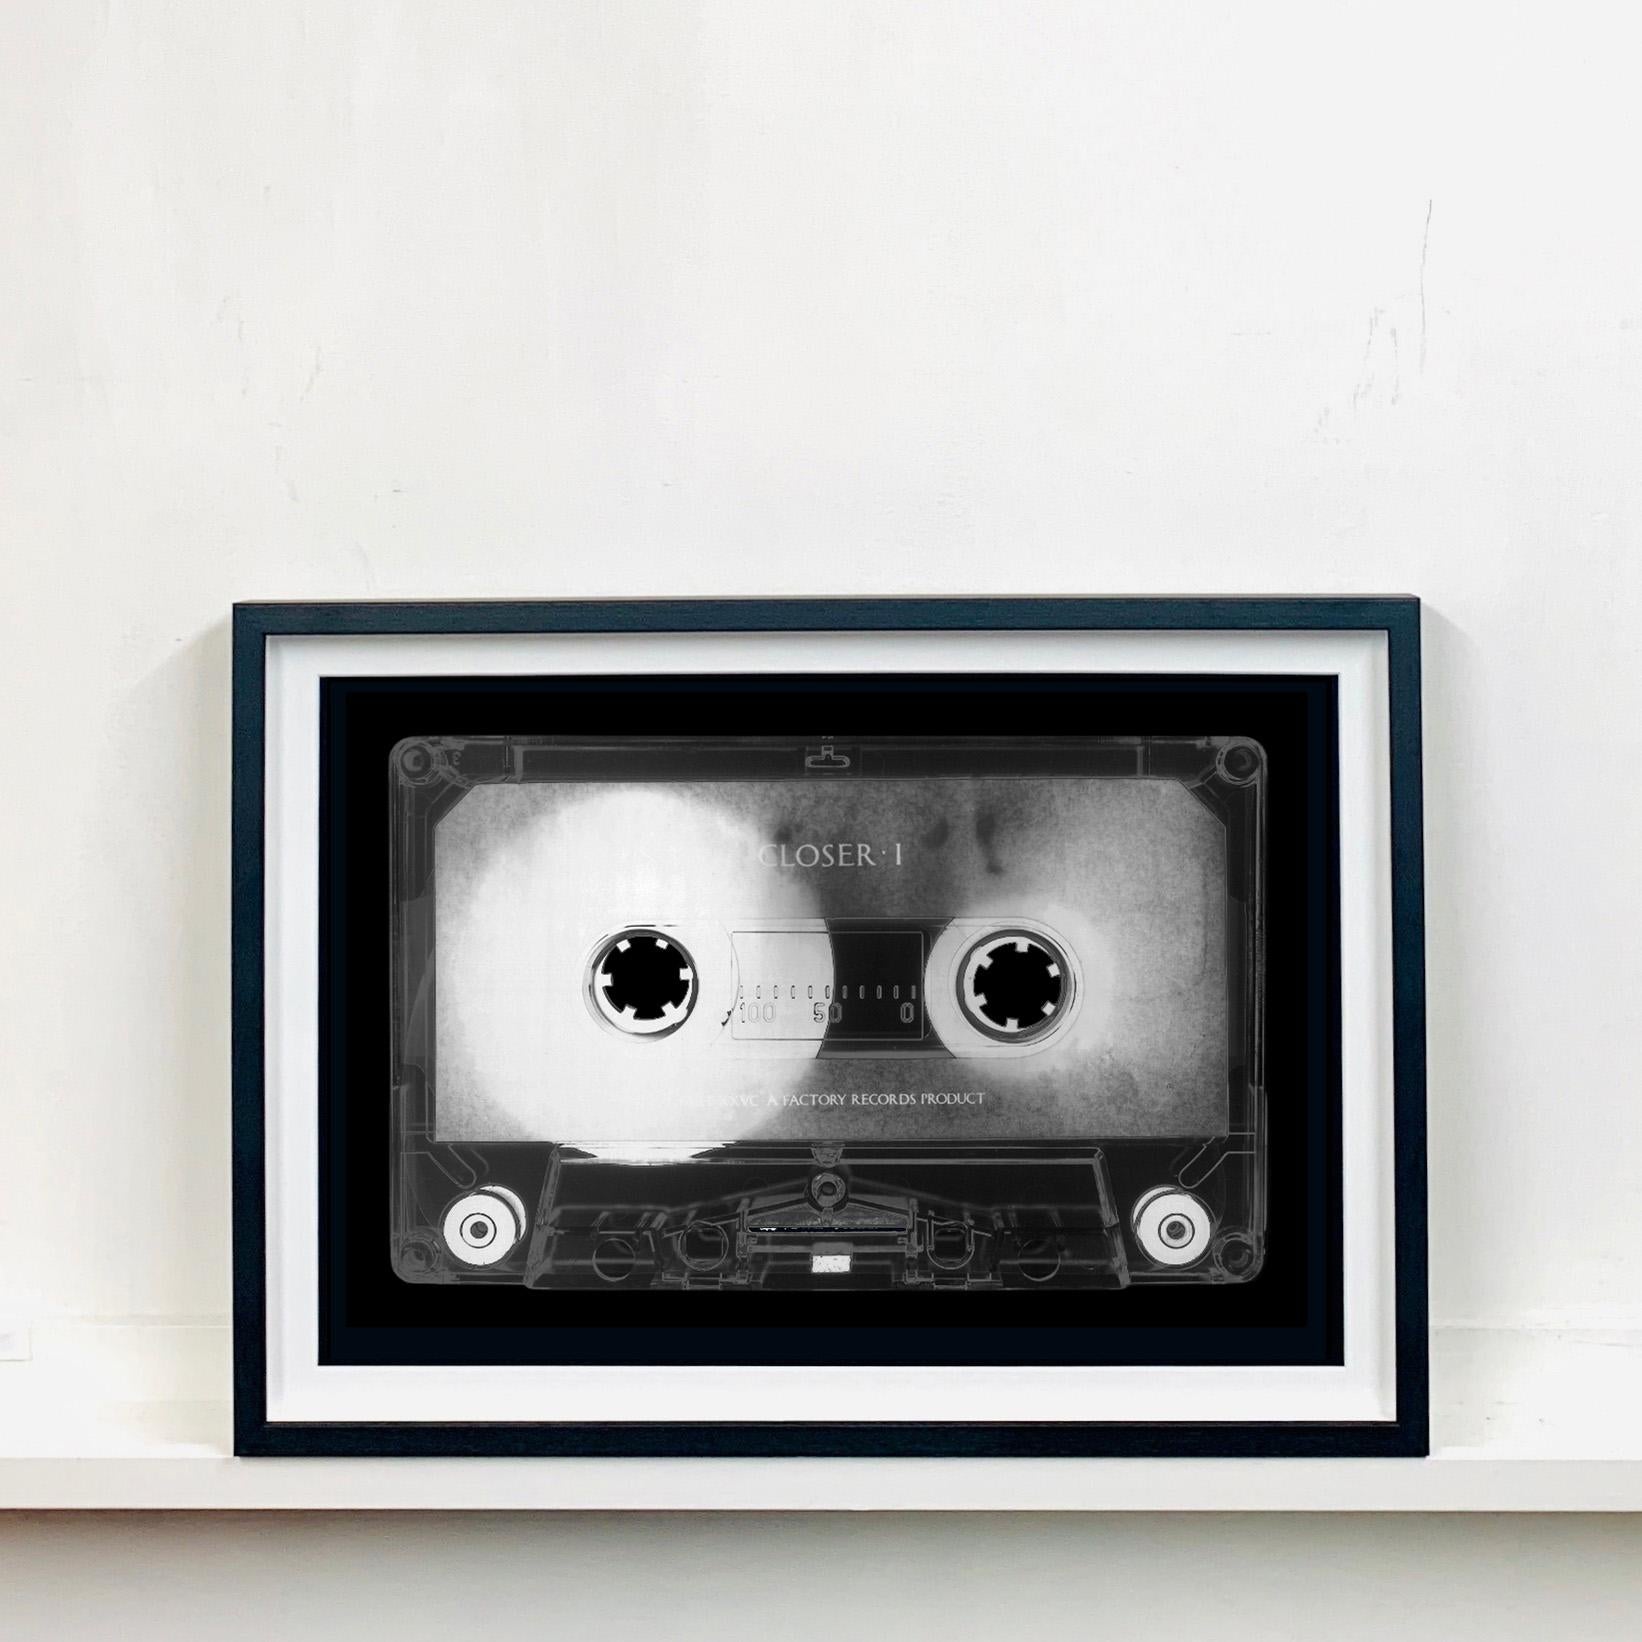 Tape Collection - Product of the 80's - Conceptual Color Music Art - Photograph by Heidler & Heeps